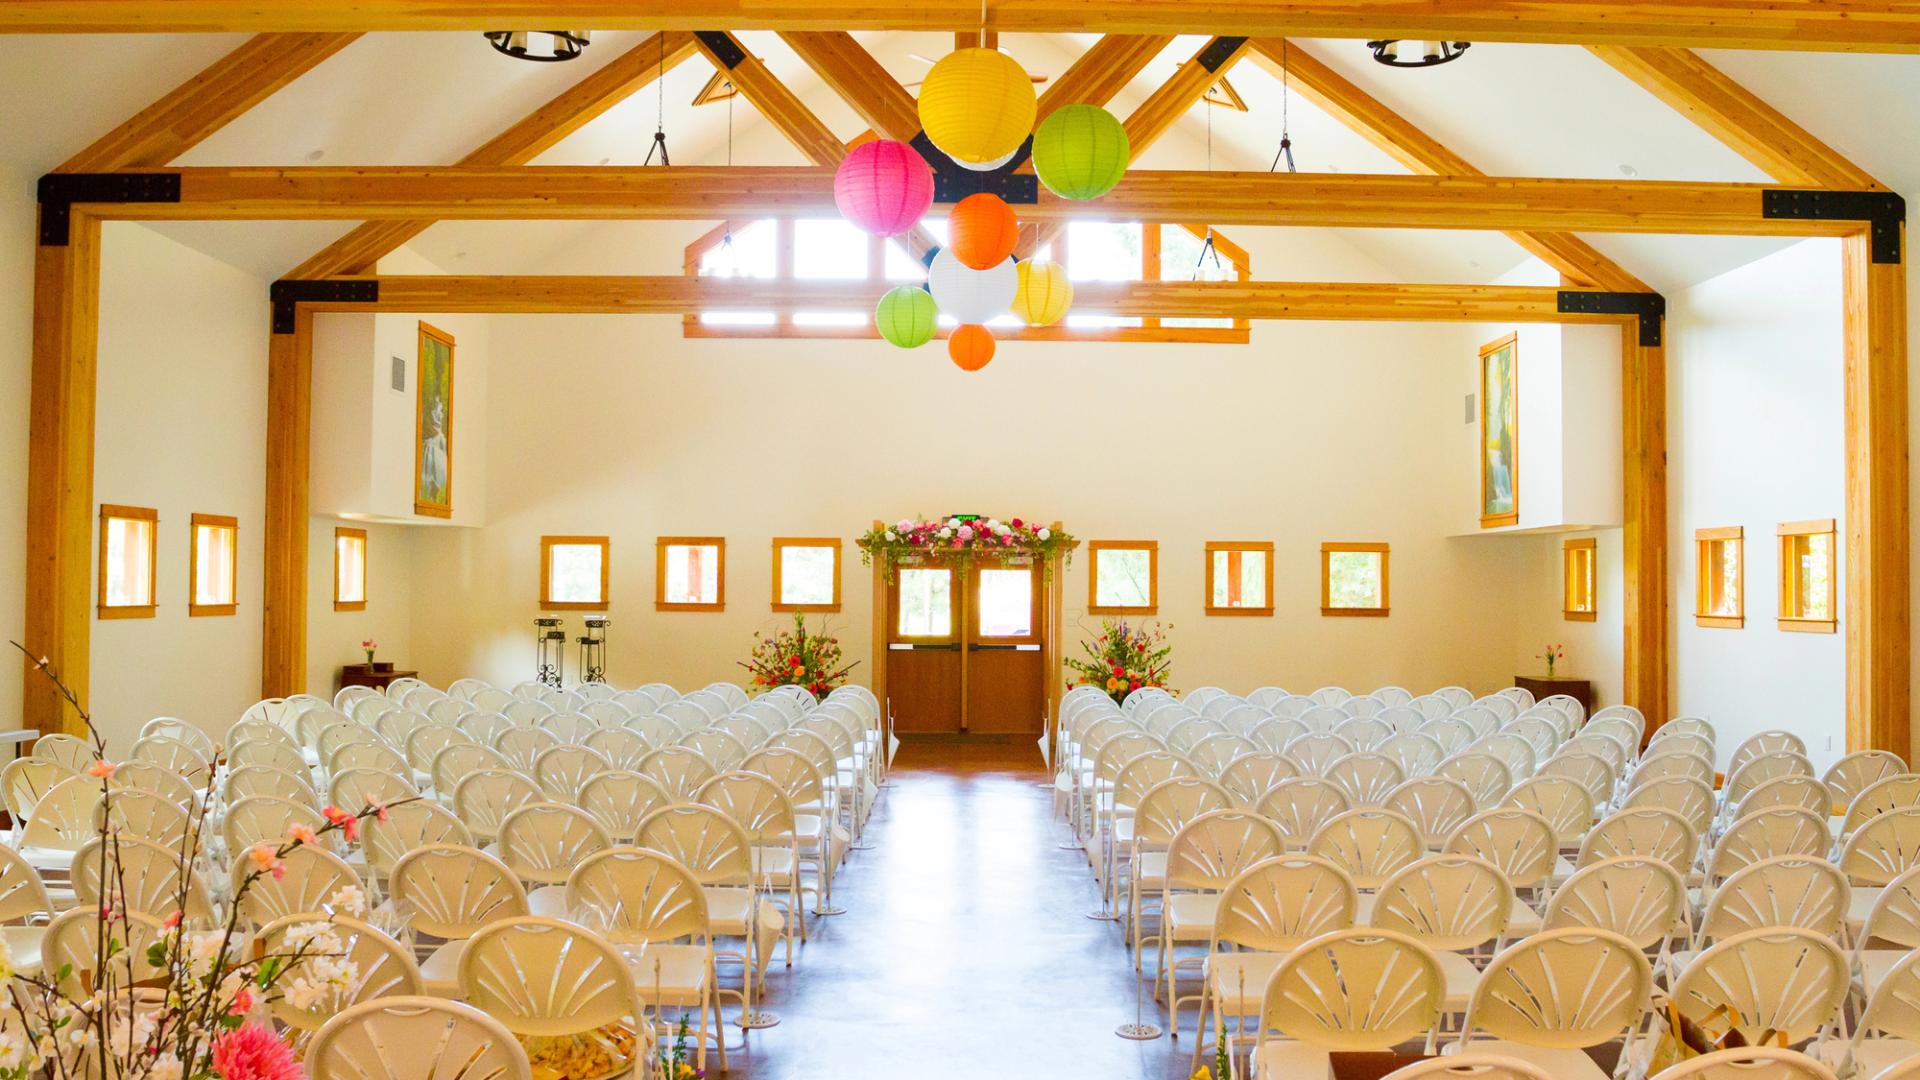 Wedding Ceremony Venues for Hire in East London